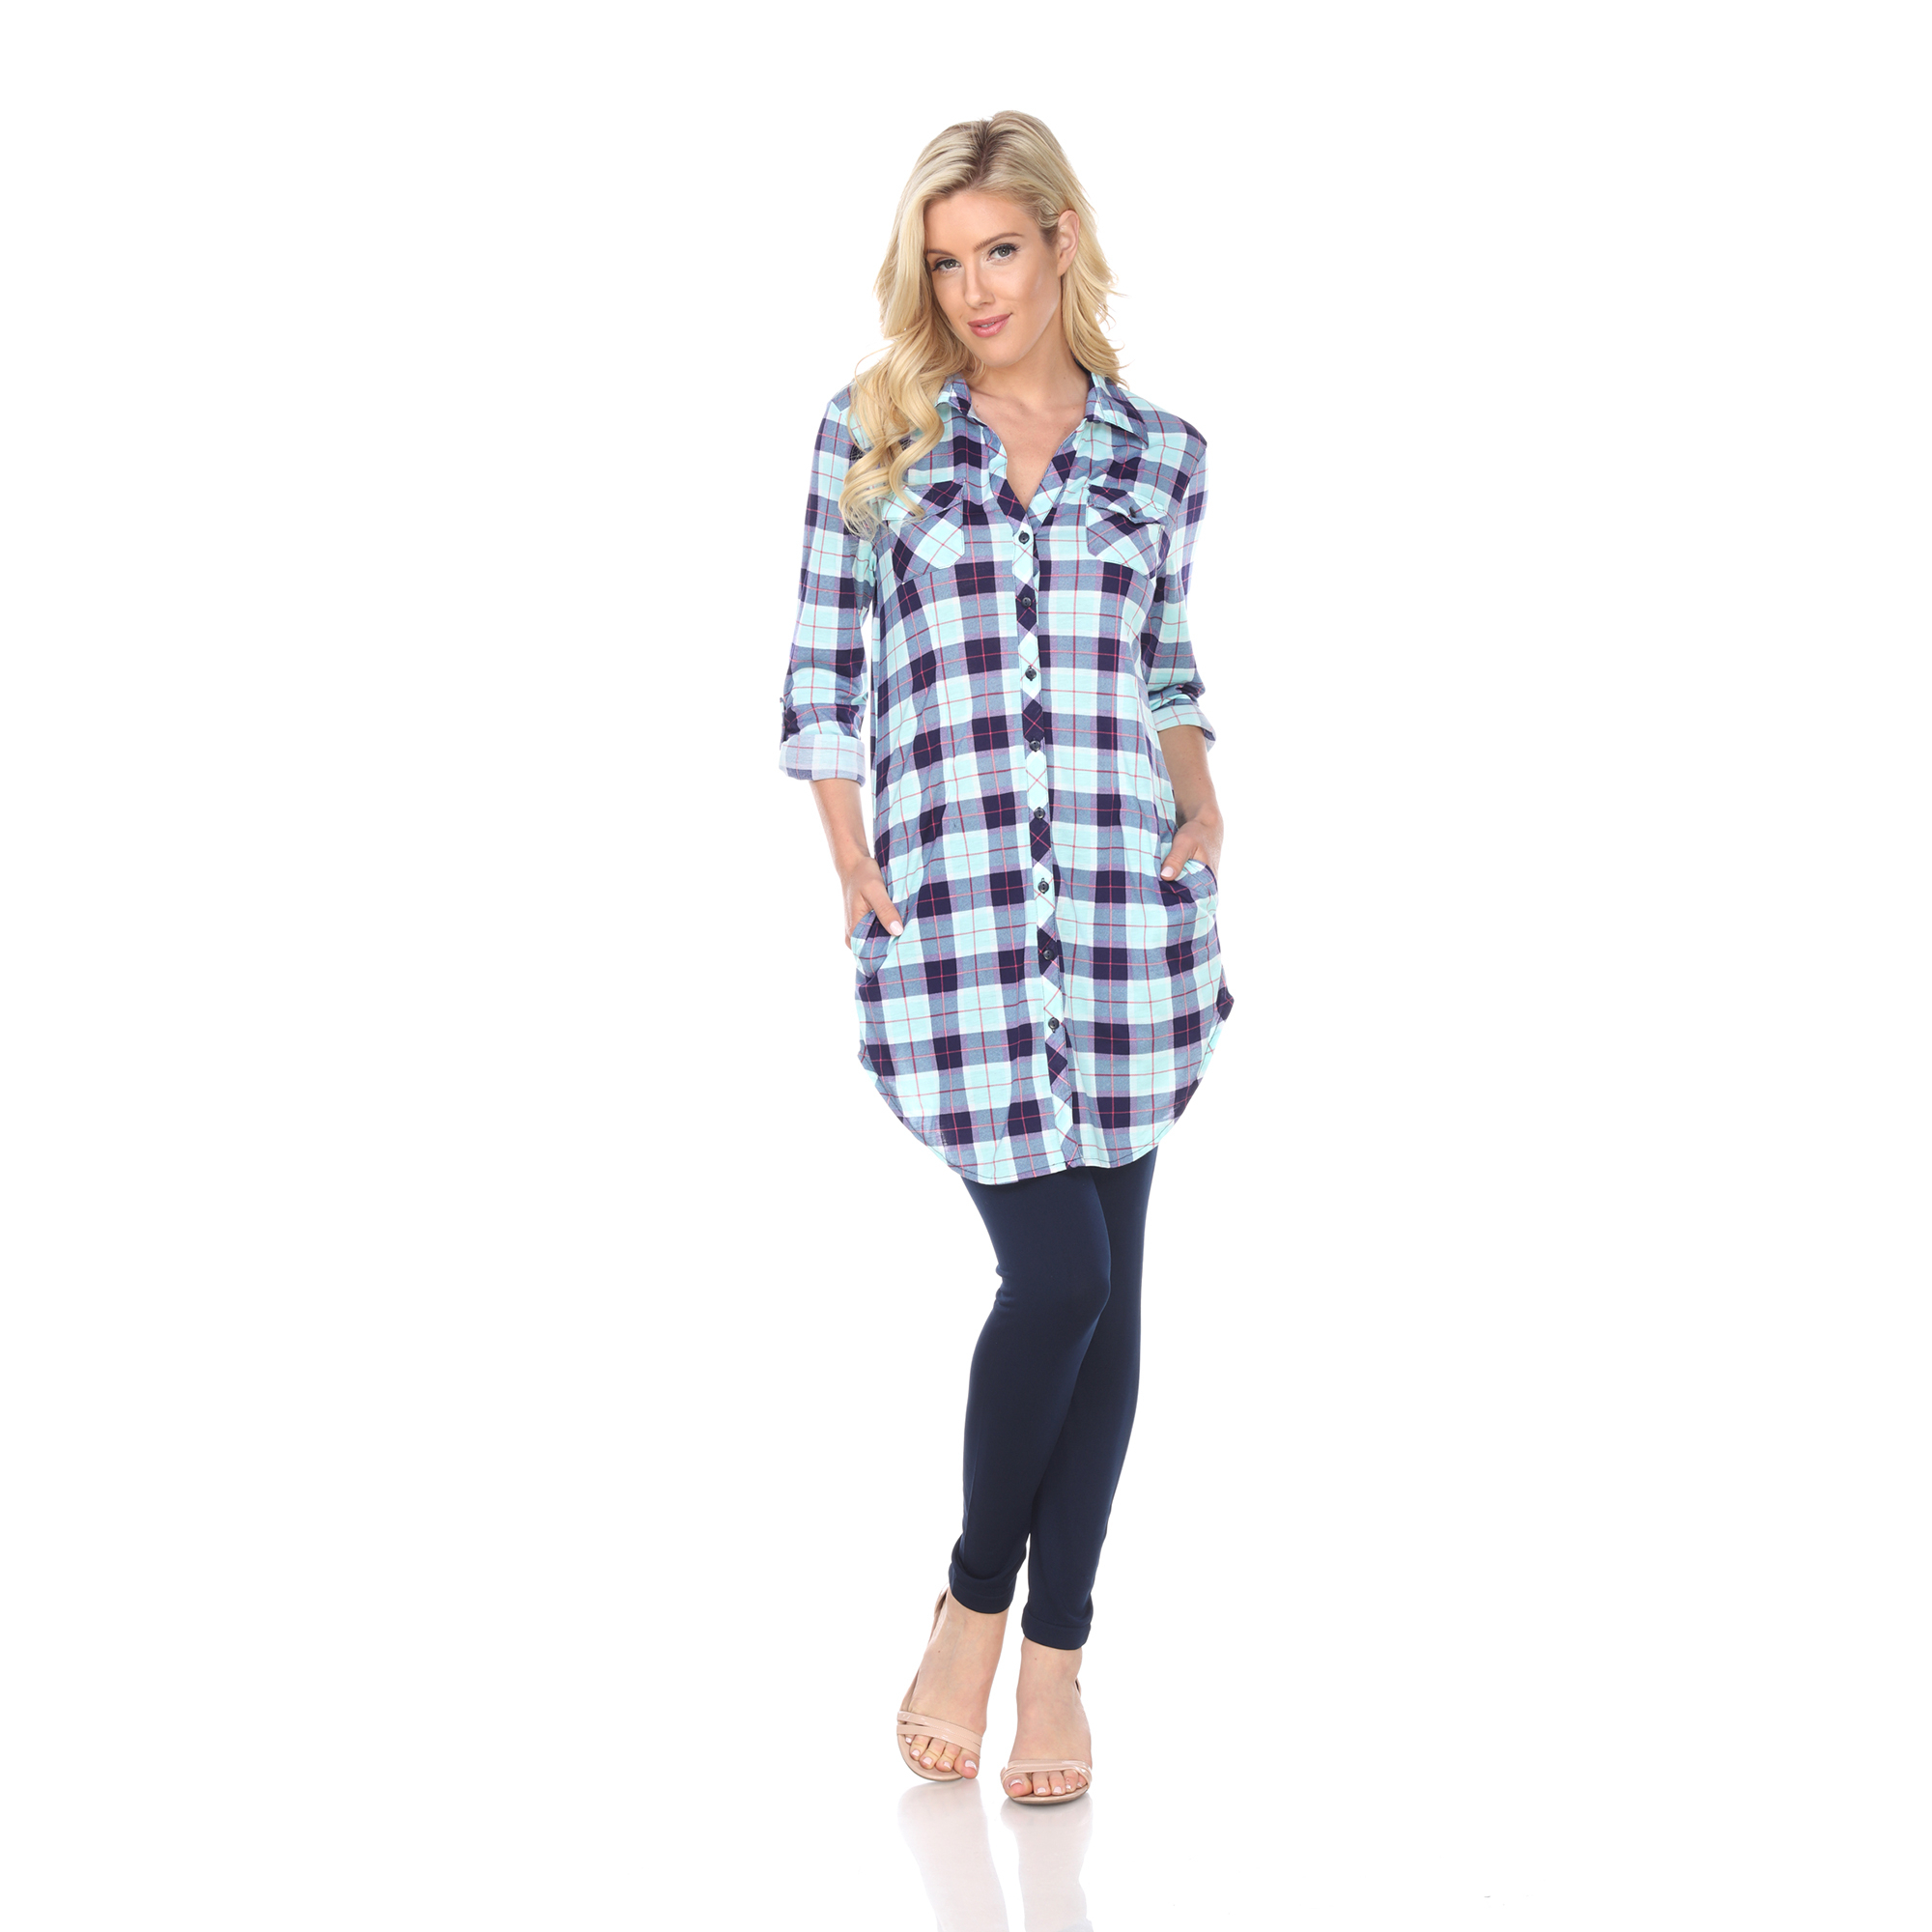 White Mark Women's Stretchy Plaid Flannel Tunic Top - Mint/Grey, Small